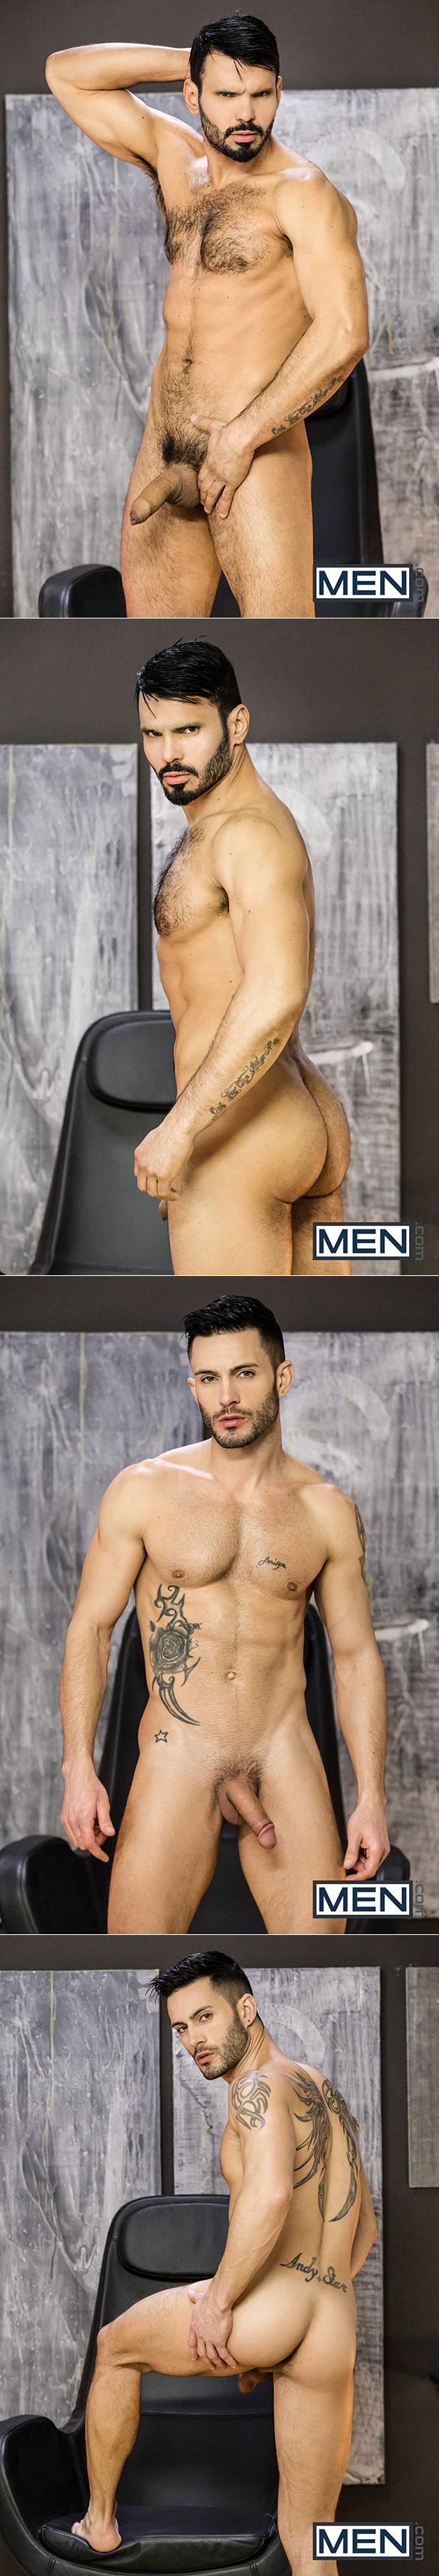 Men.com: Jean Franko bangs Andy Star in "The Specialist"